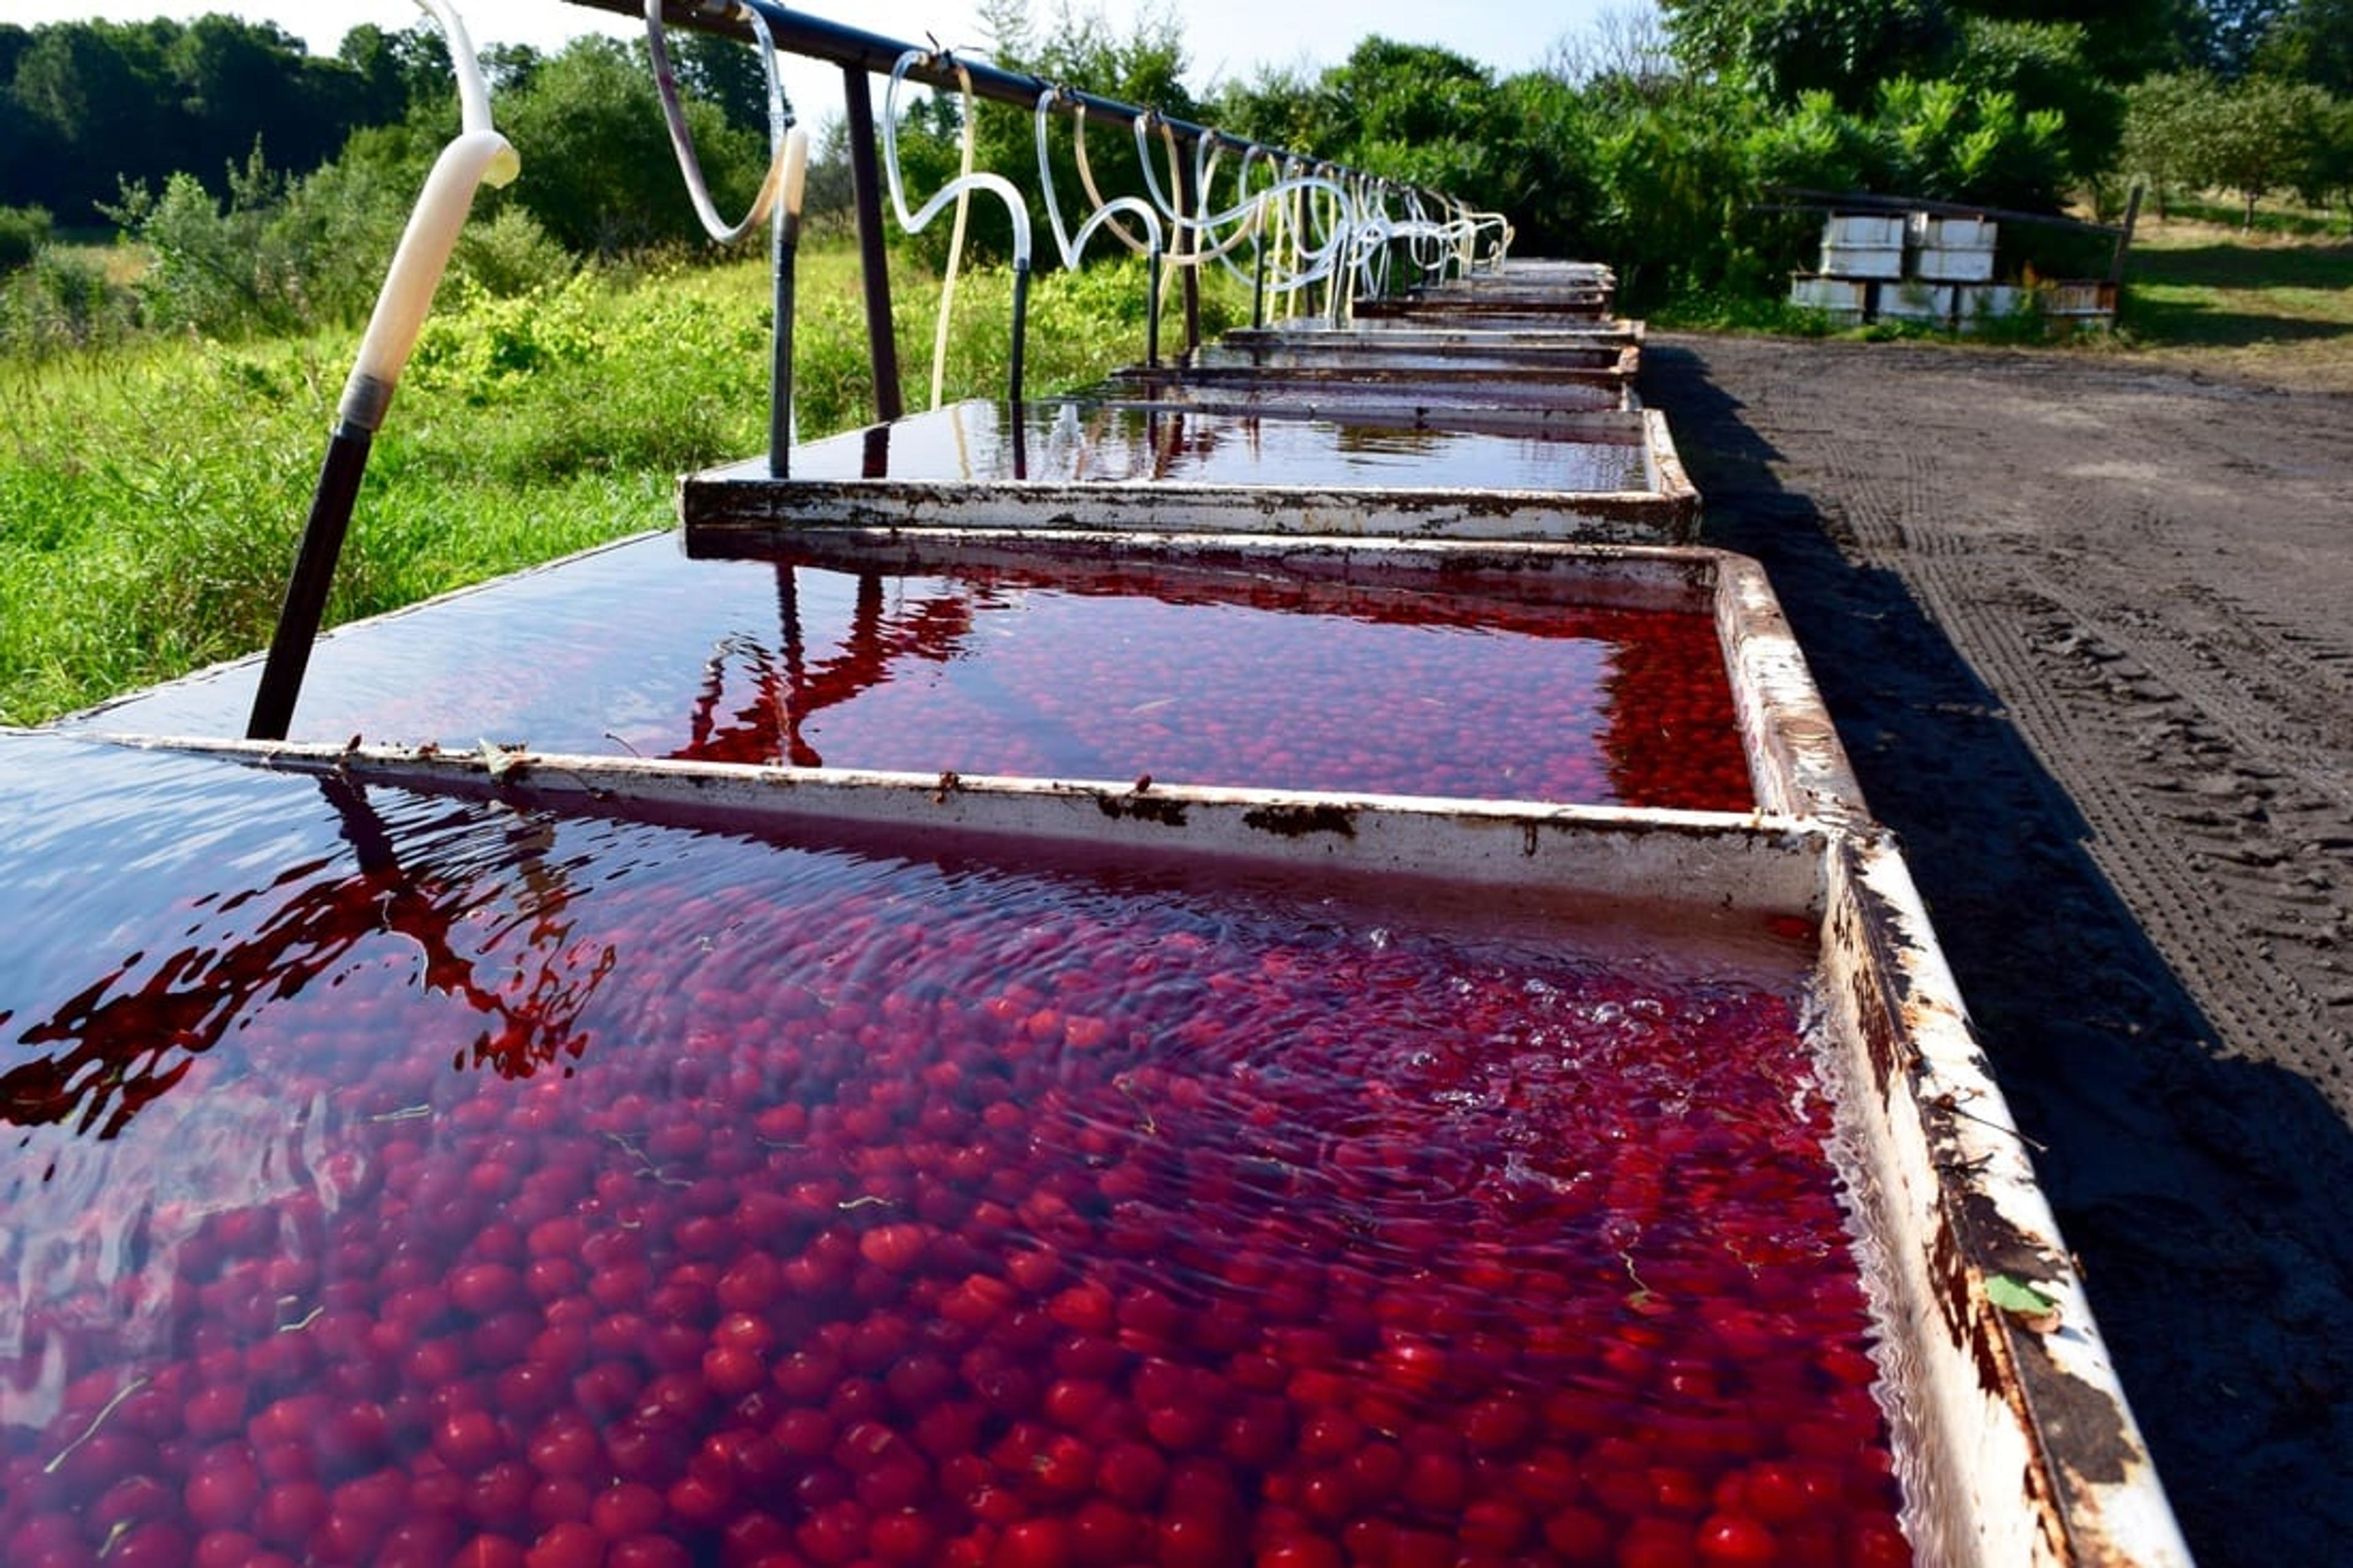 Cherries shown soaking during the harvesting process.